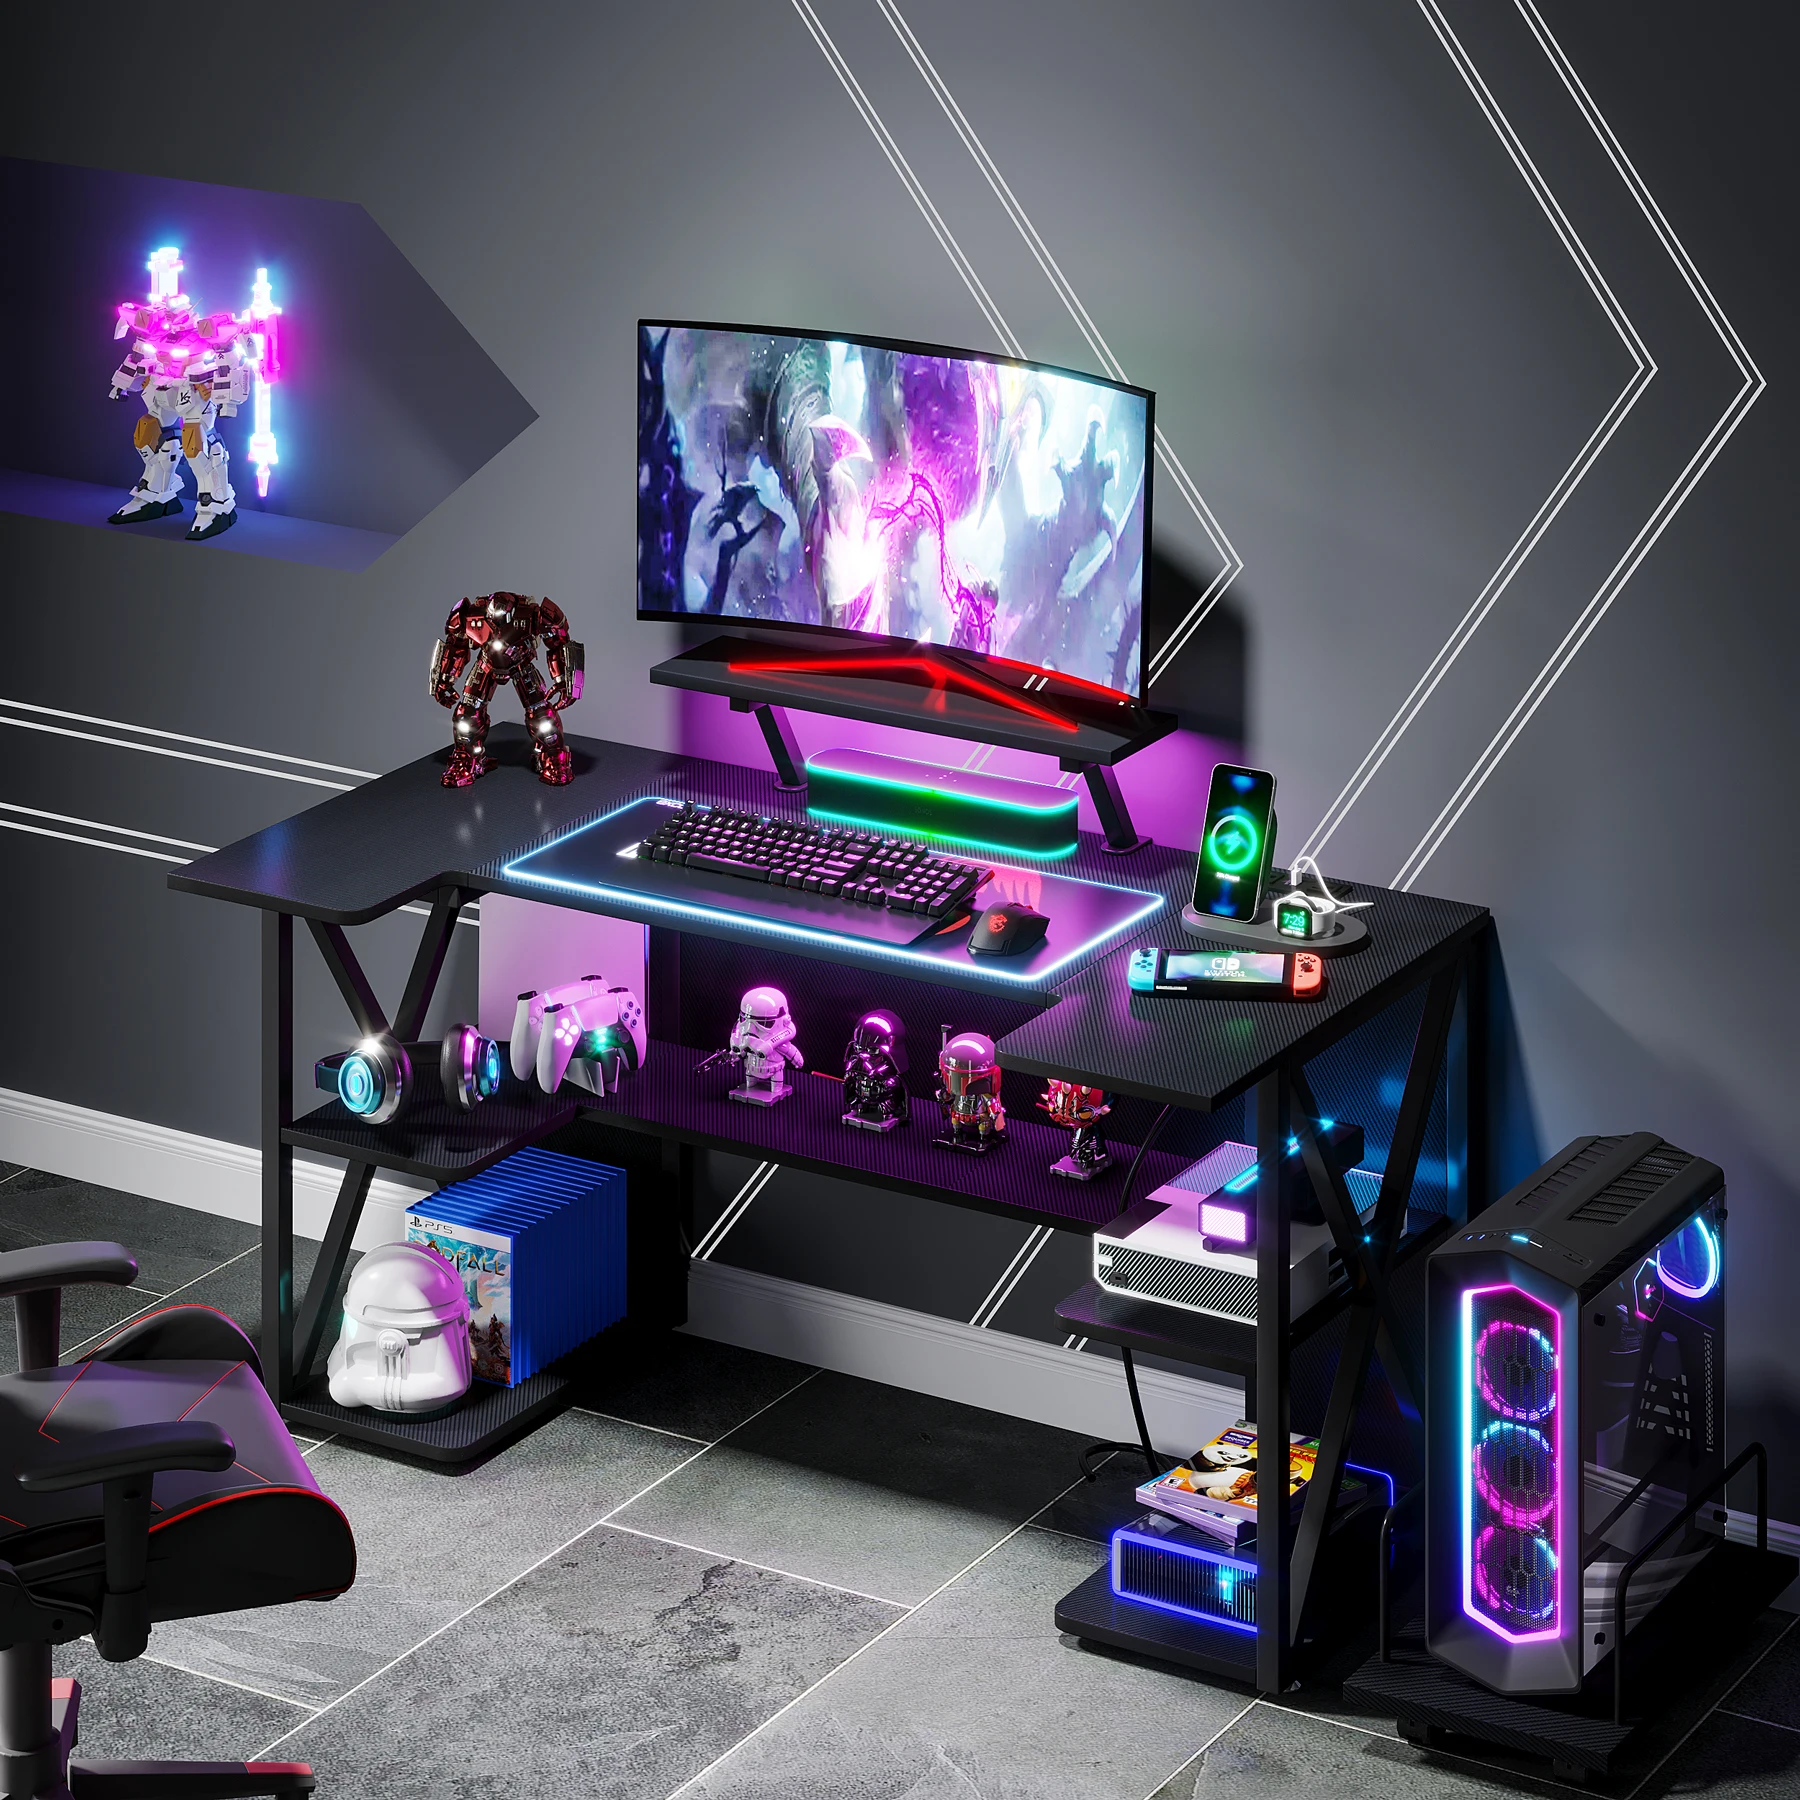 Wholesale New Design Best Modern Black Gaming Computer Desk For Home Office Computer Table